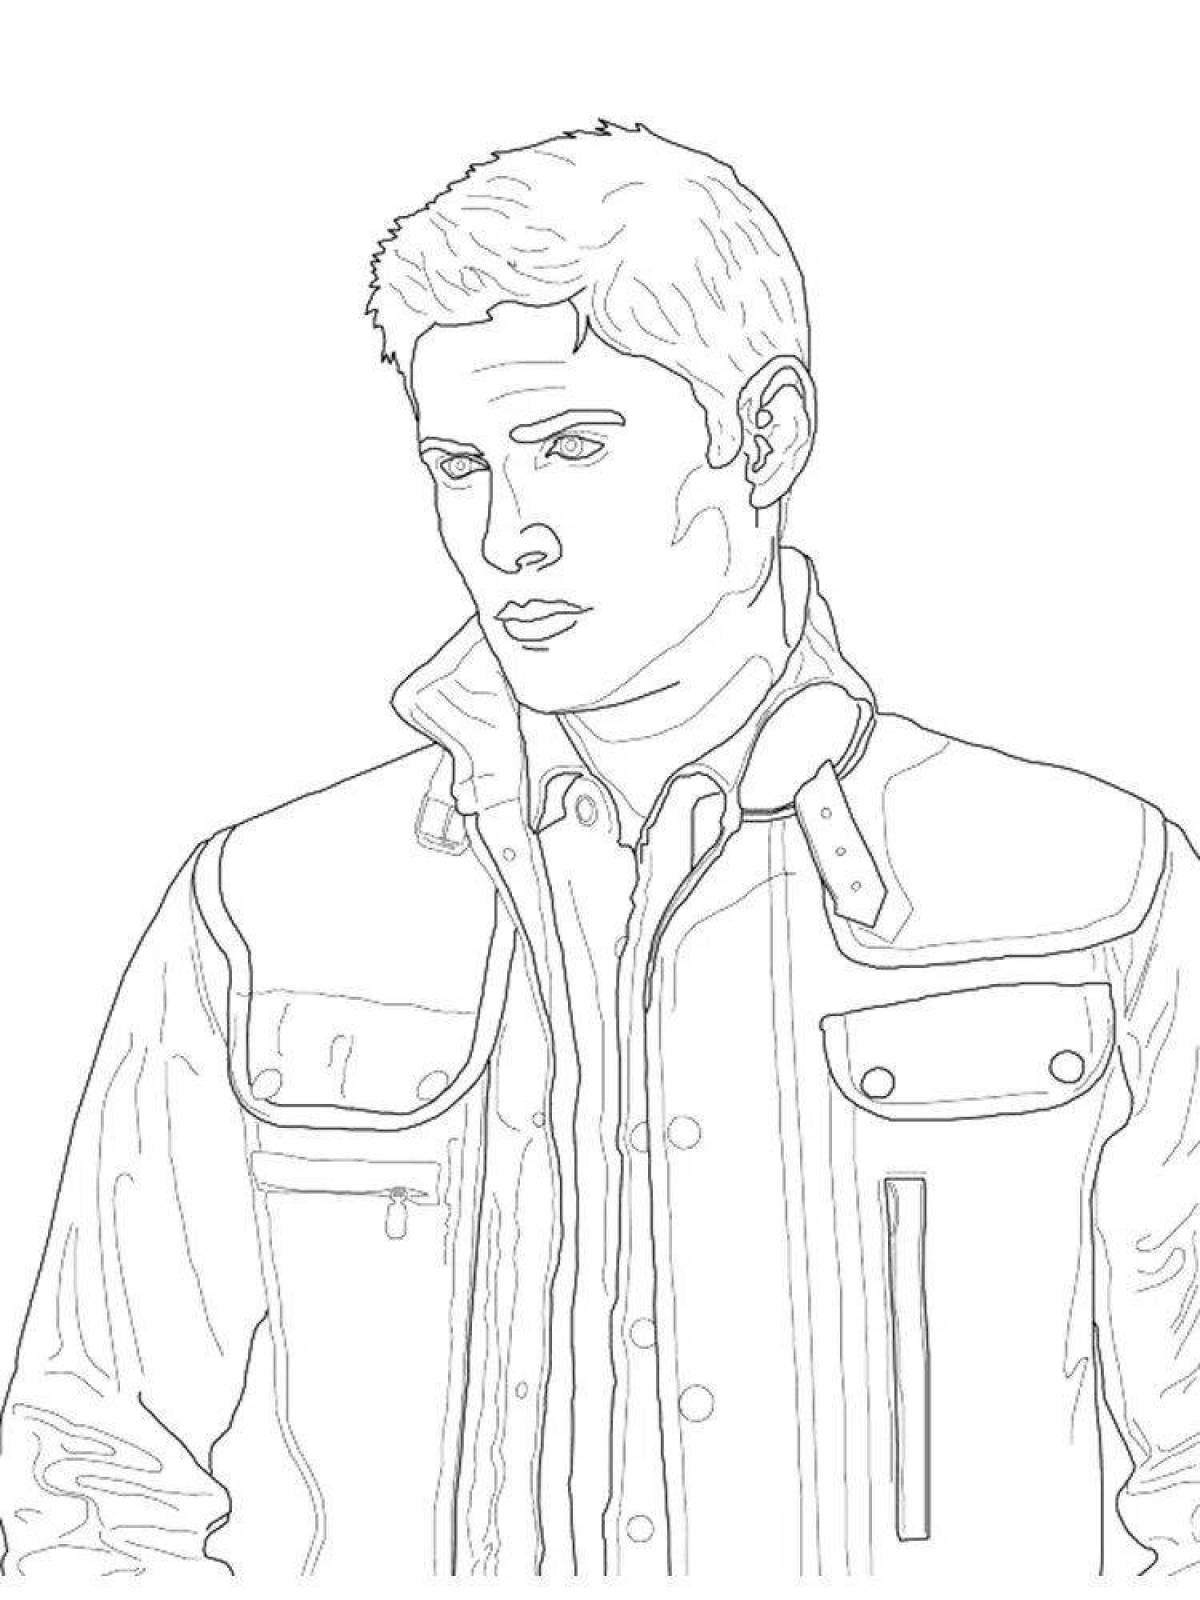 Coloring book supernatural is amazing